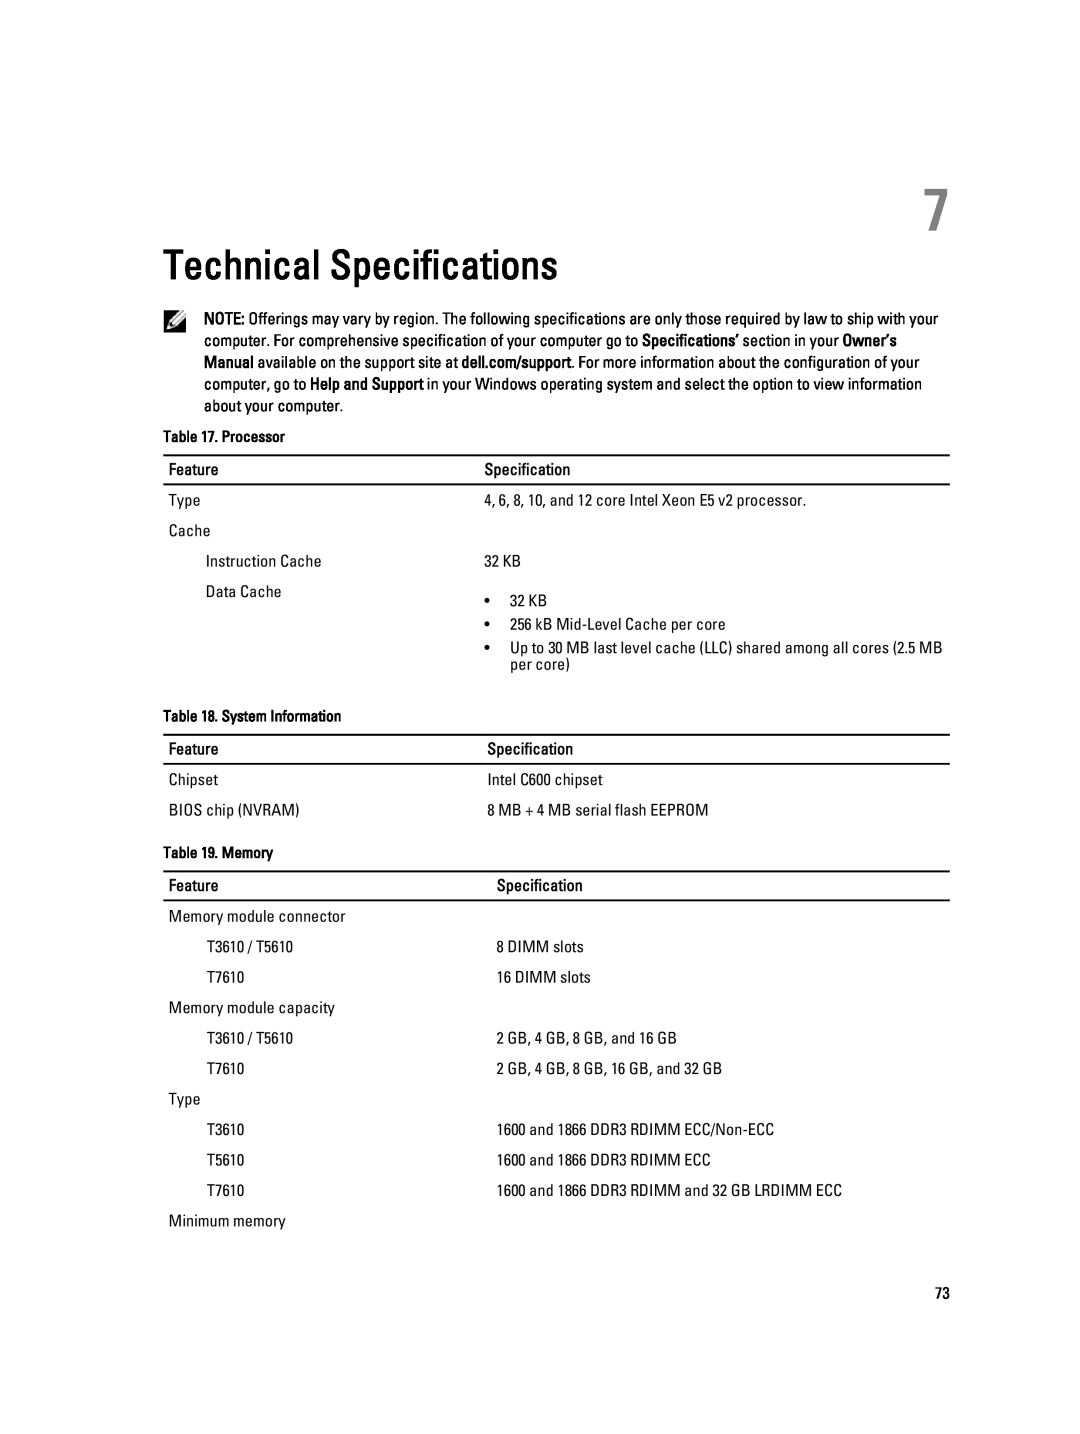 Dell T7610 owner manual Technical Specifications, Processor, System Information, Memory 